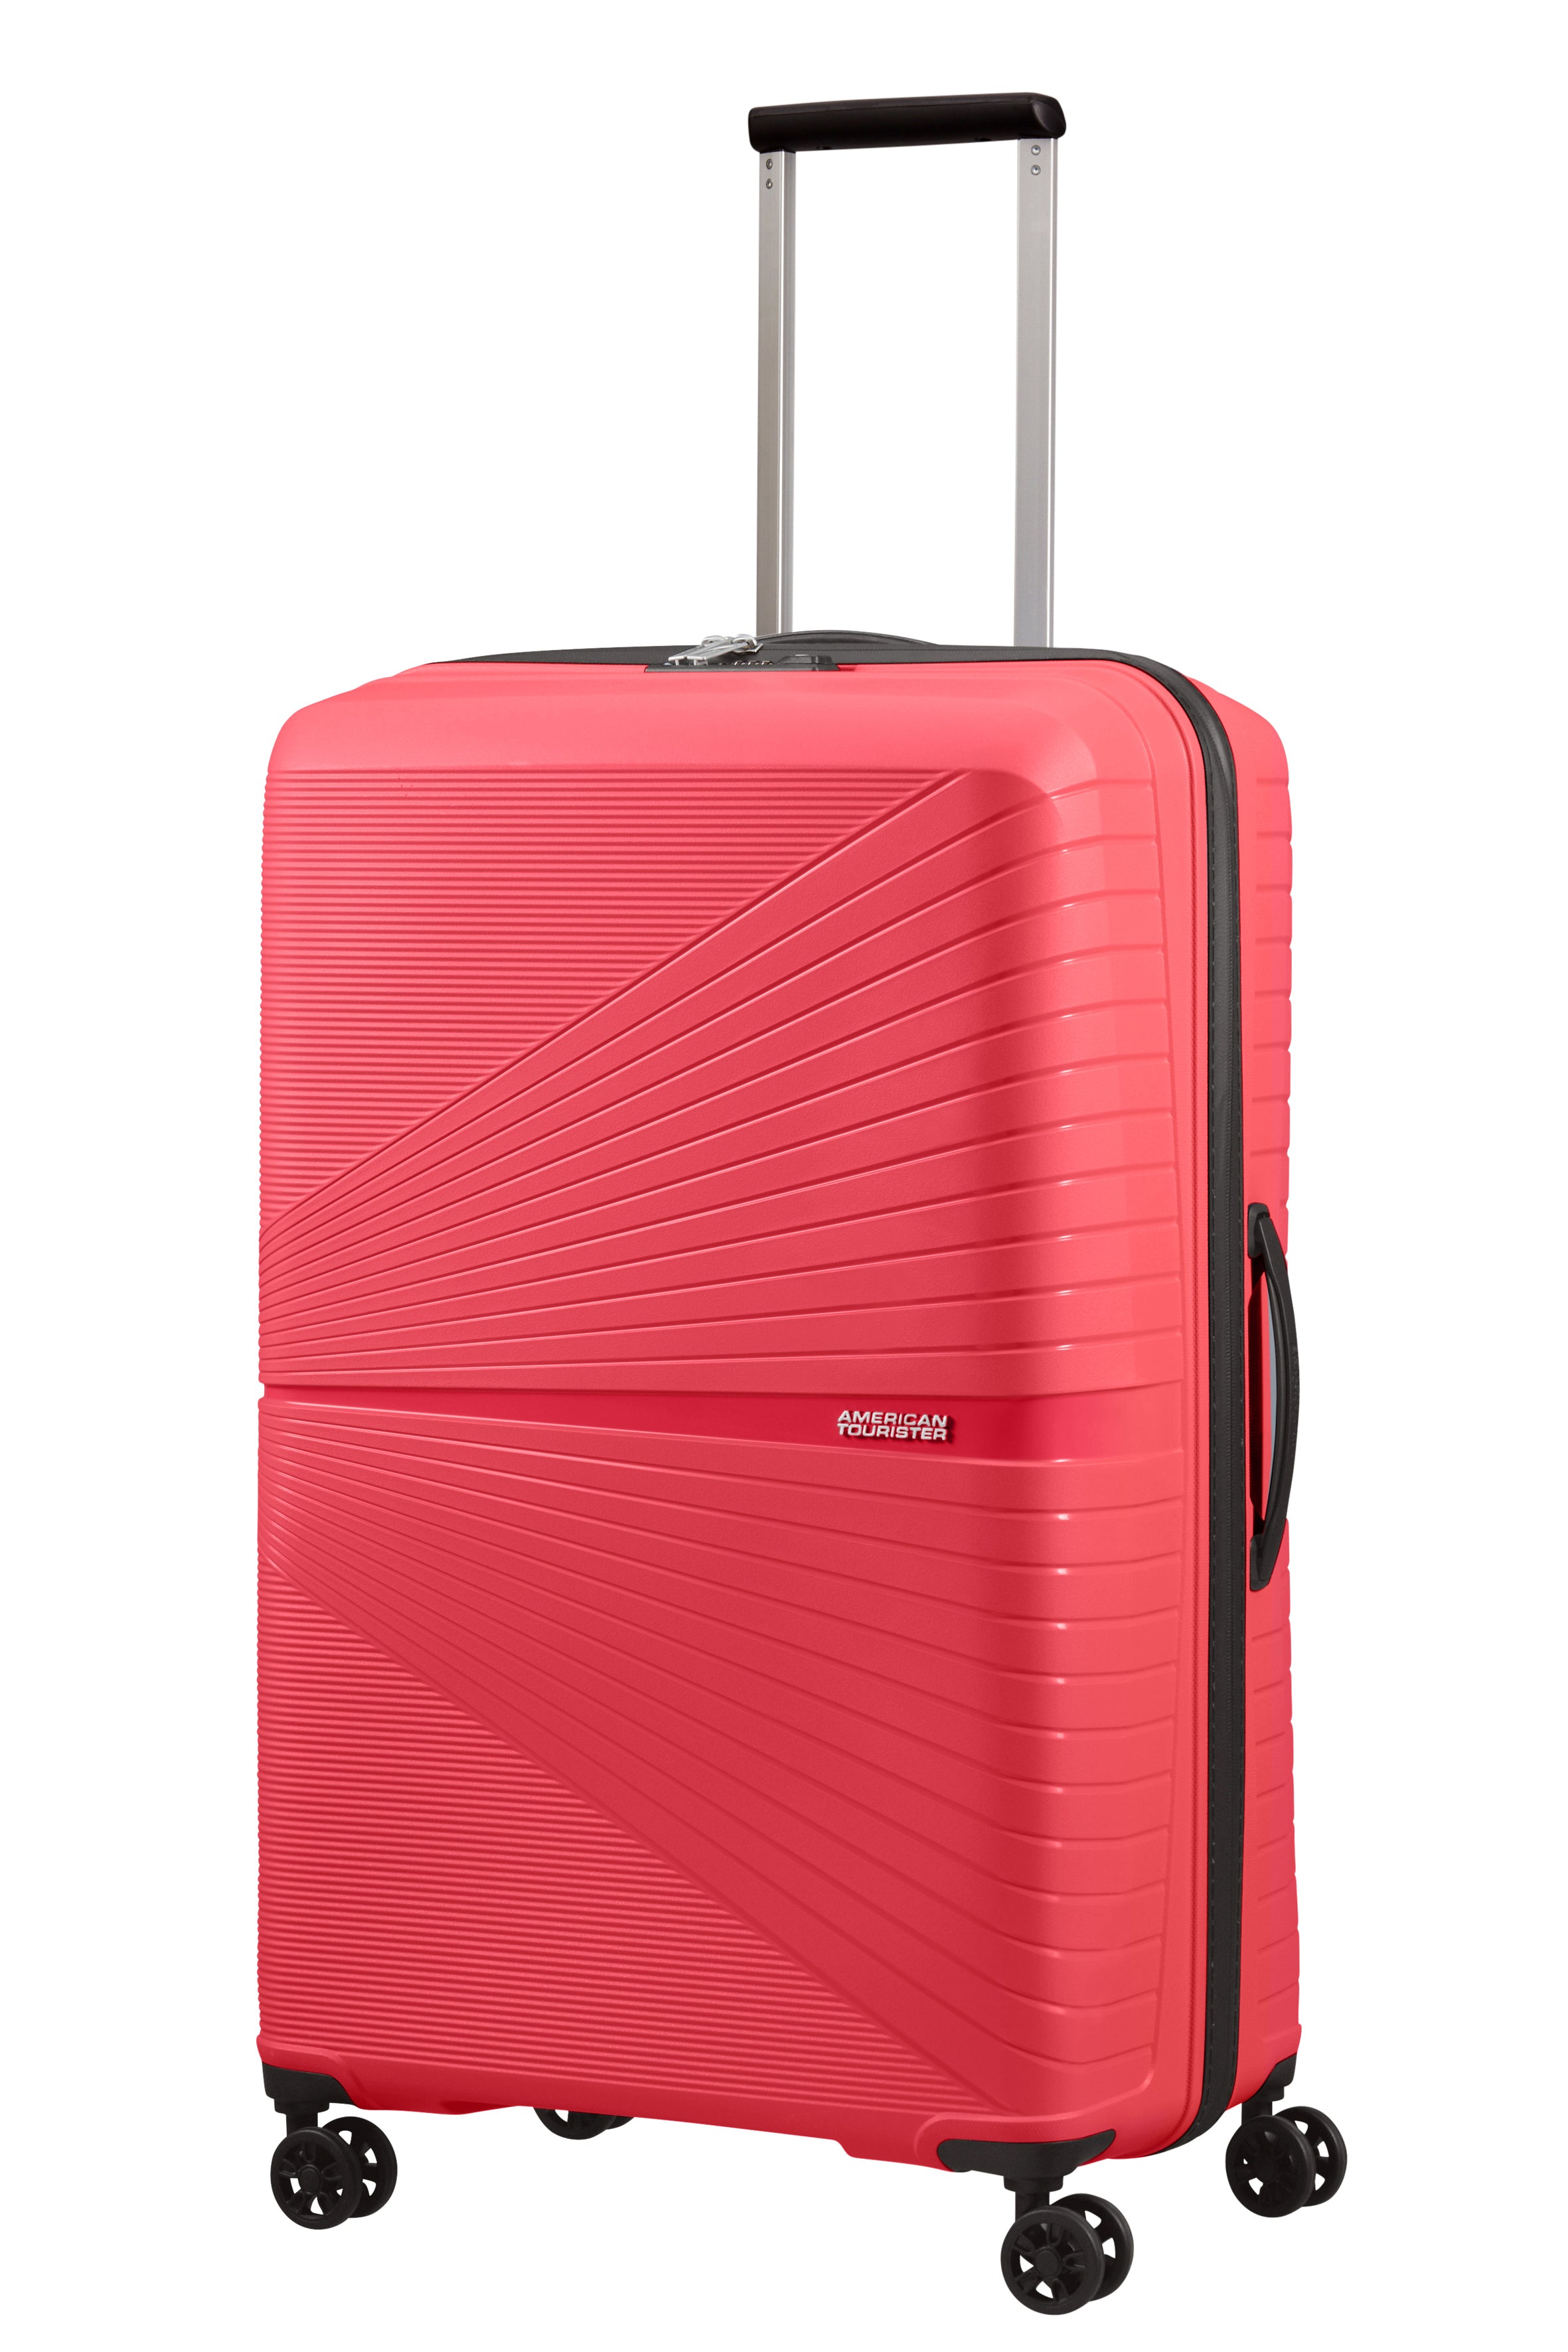 American Tourister - Airconic 77cm Large 4 Wheel Hard Suitcase - Paradise Pink-1